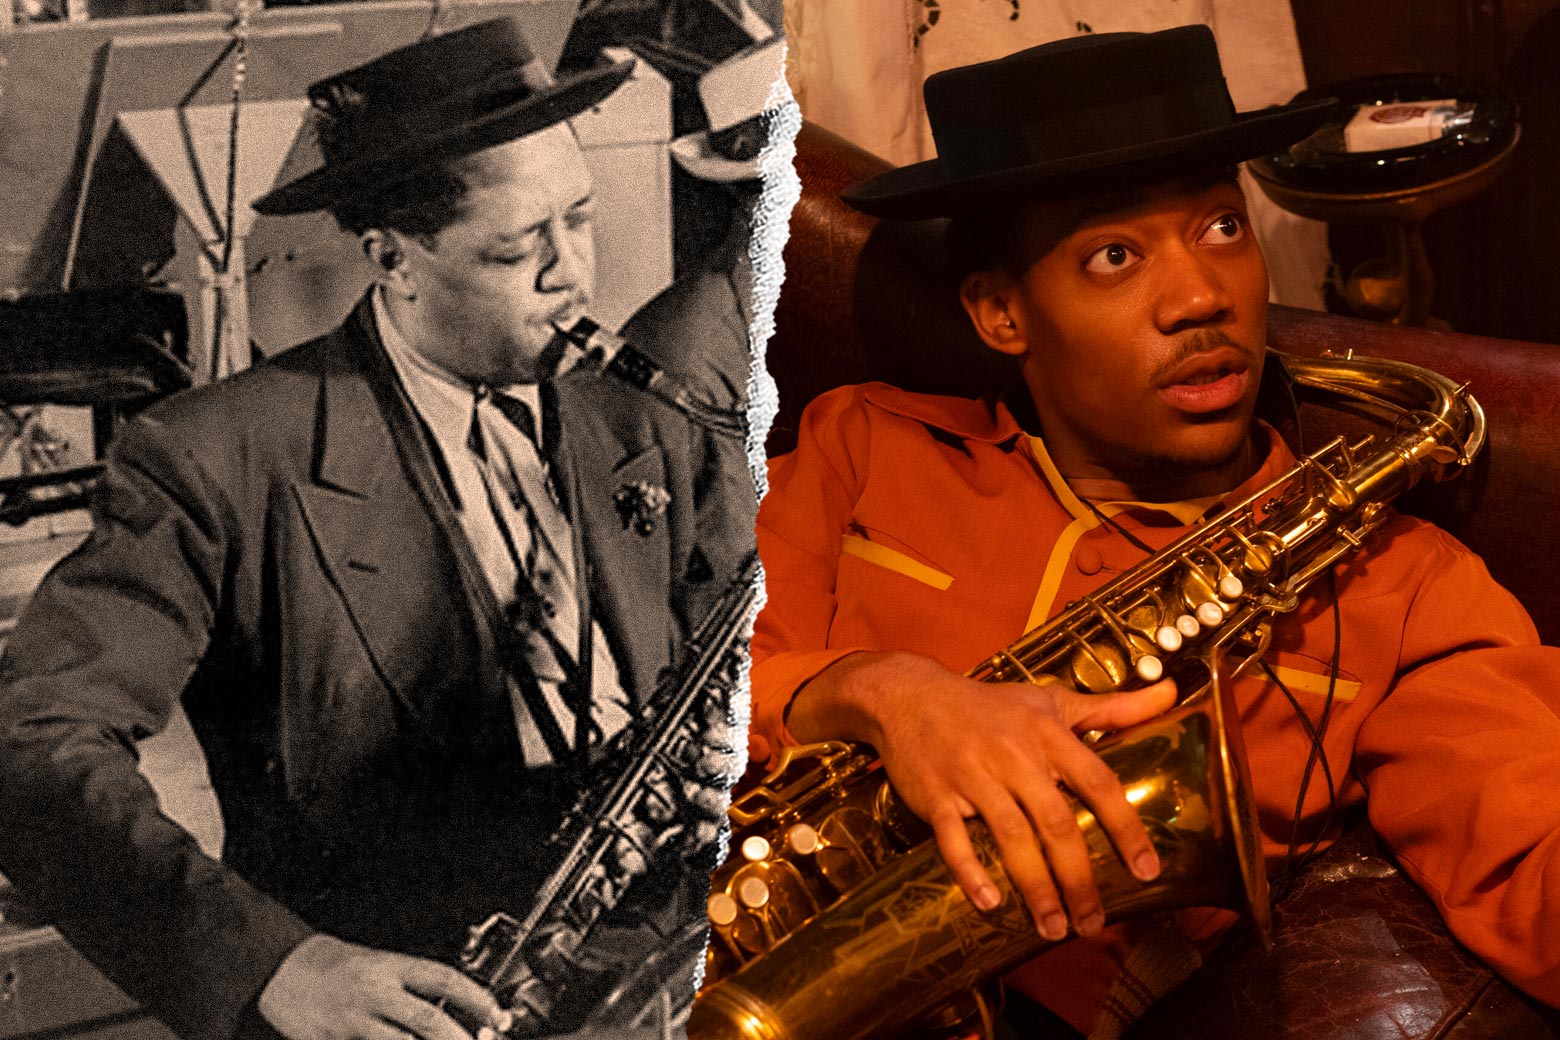 Lester Young and Tyler James Williams, each with a saxophone in hand.